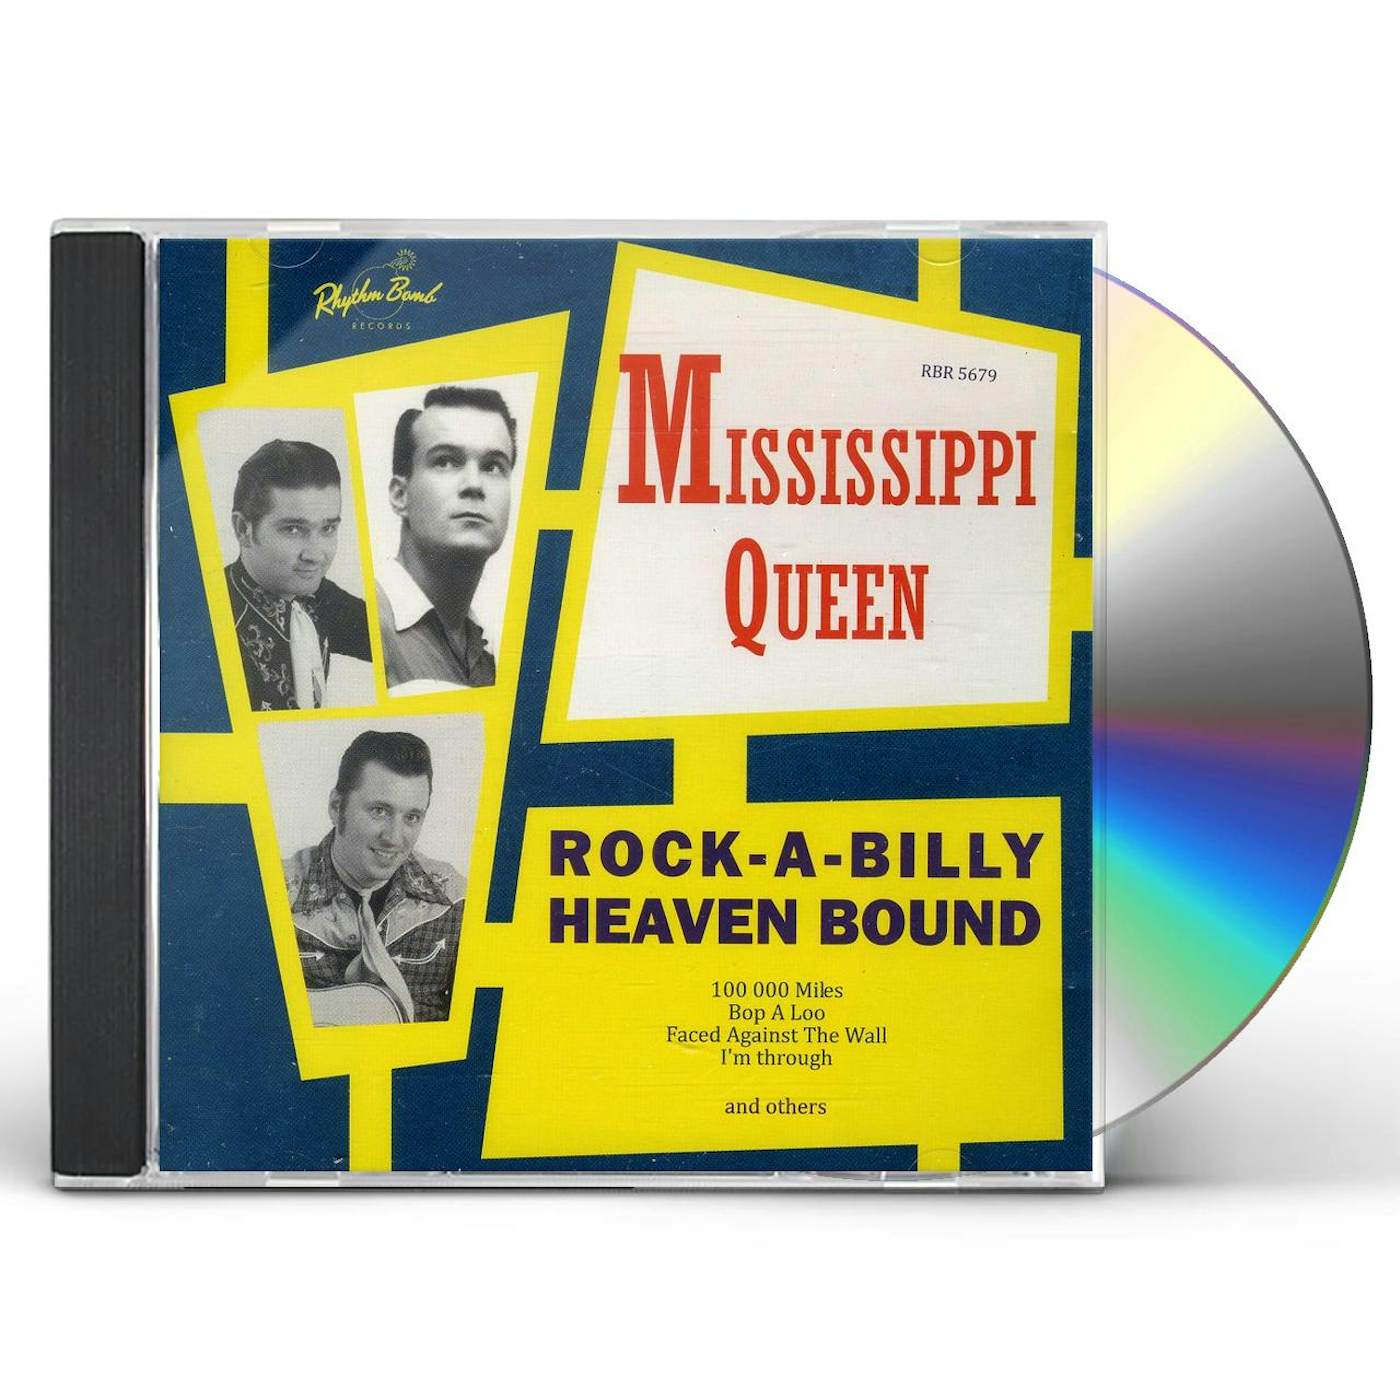 Mississippi Queen ROCK-A-BILLY HEAVEN BOUND CD